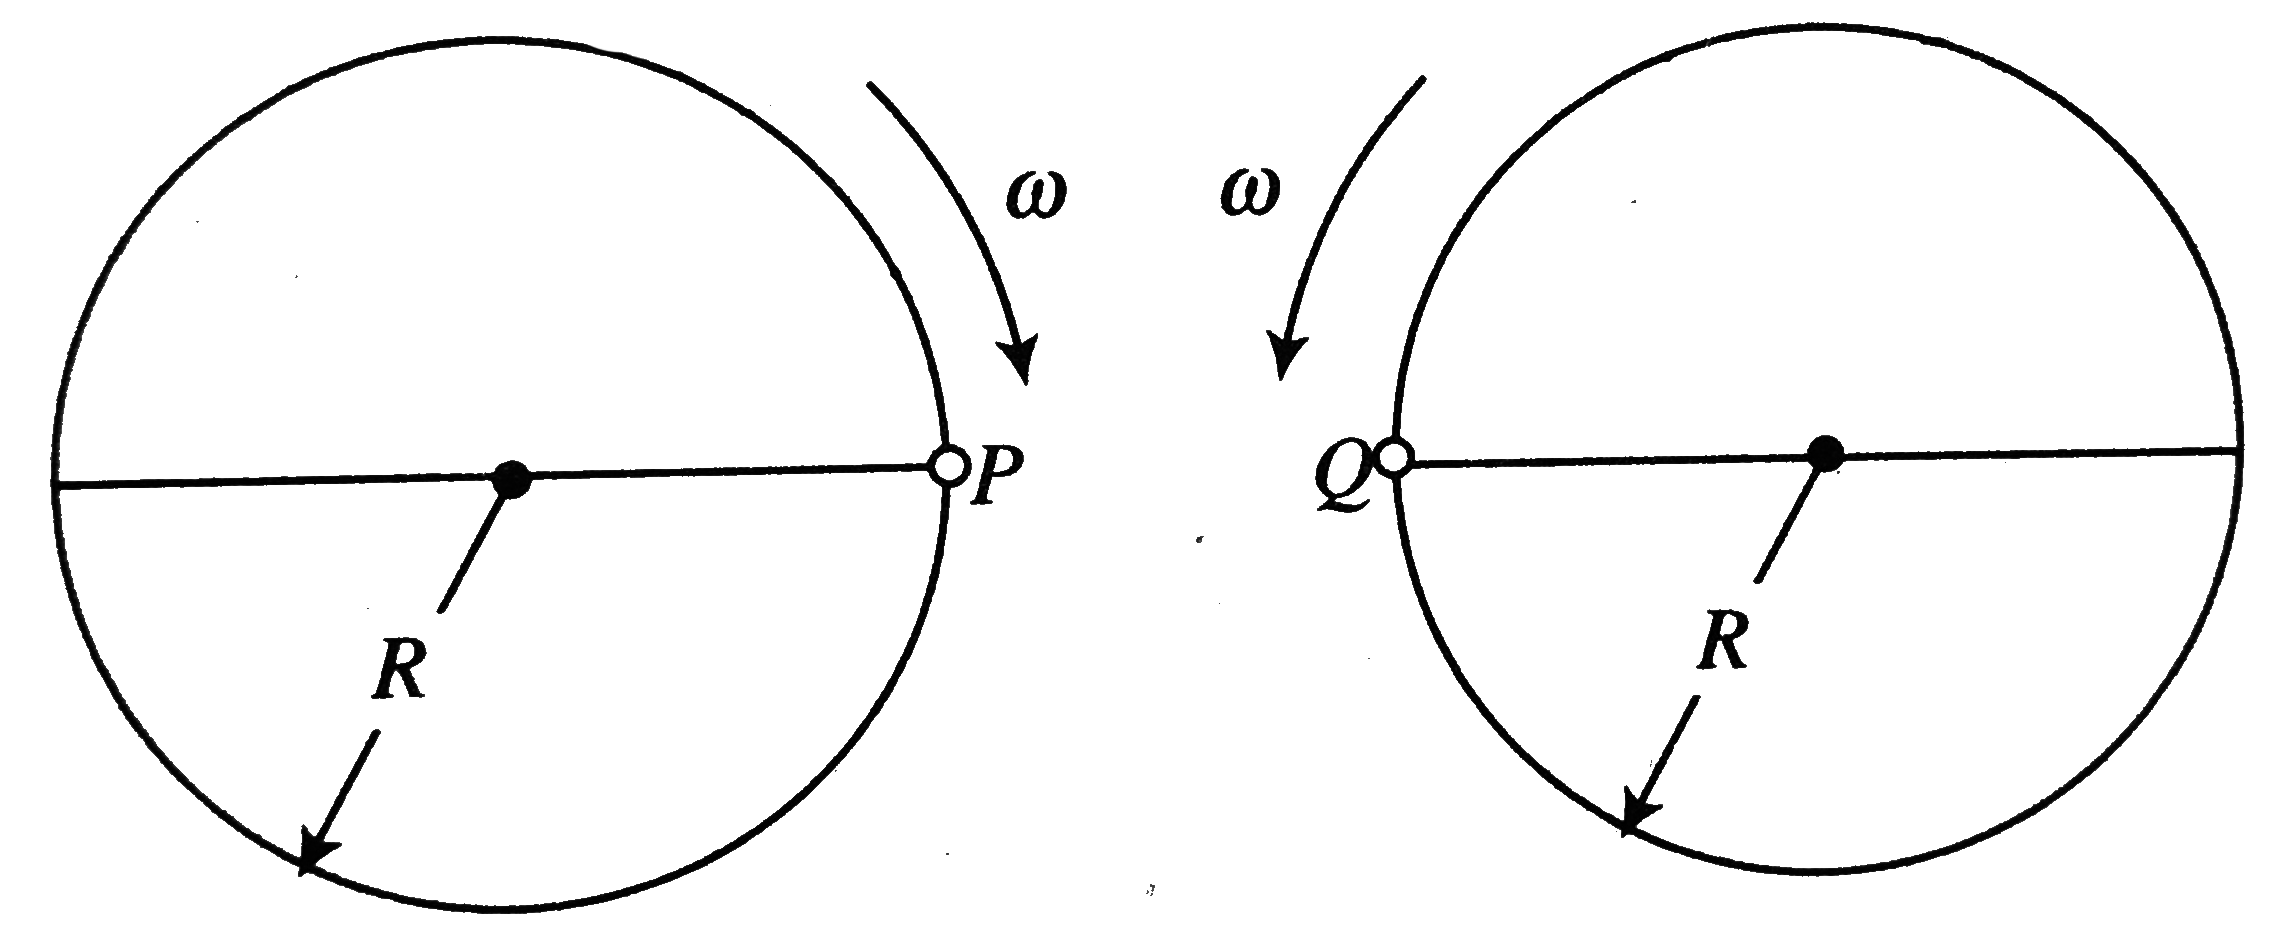 Two identical discs of same radius R are rotating about their axes in opposite directions with the same constant angular speed omega. The discs are in the same horizontal plane. At time t = 0, the points P and Q are facing each other as shown in the figure. The relative speed between the two points P and Q is v(r). In one time period (T) of rotation of the discs, v(r) as a function of time is best represented by